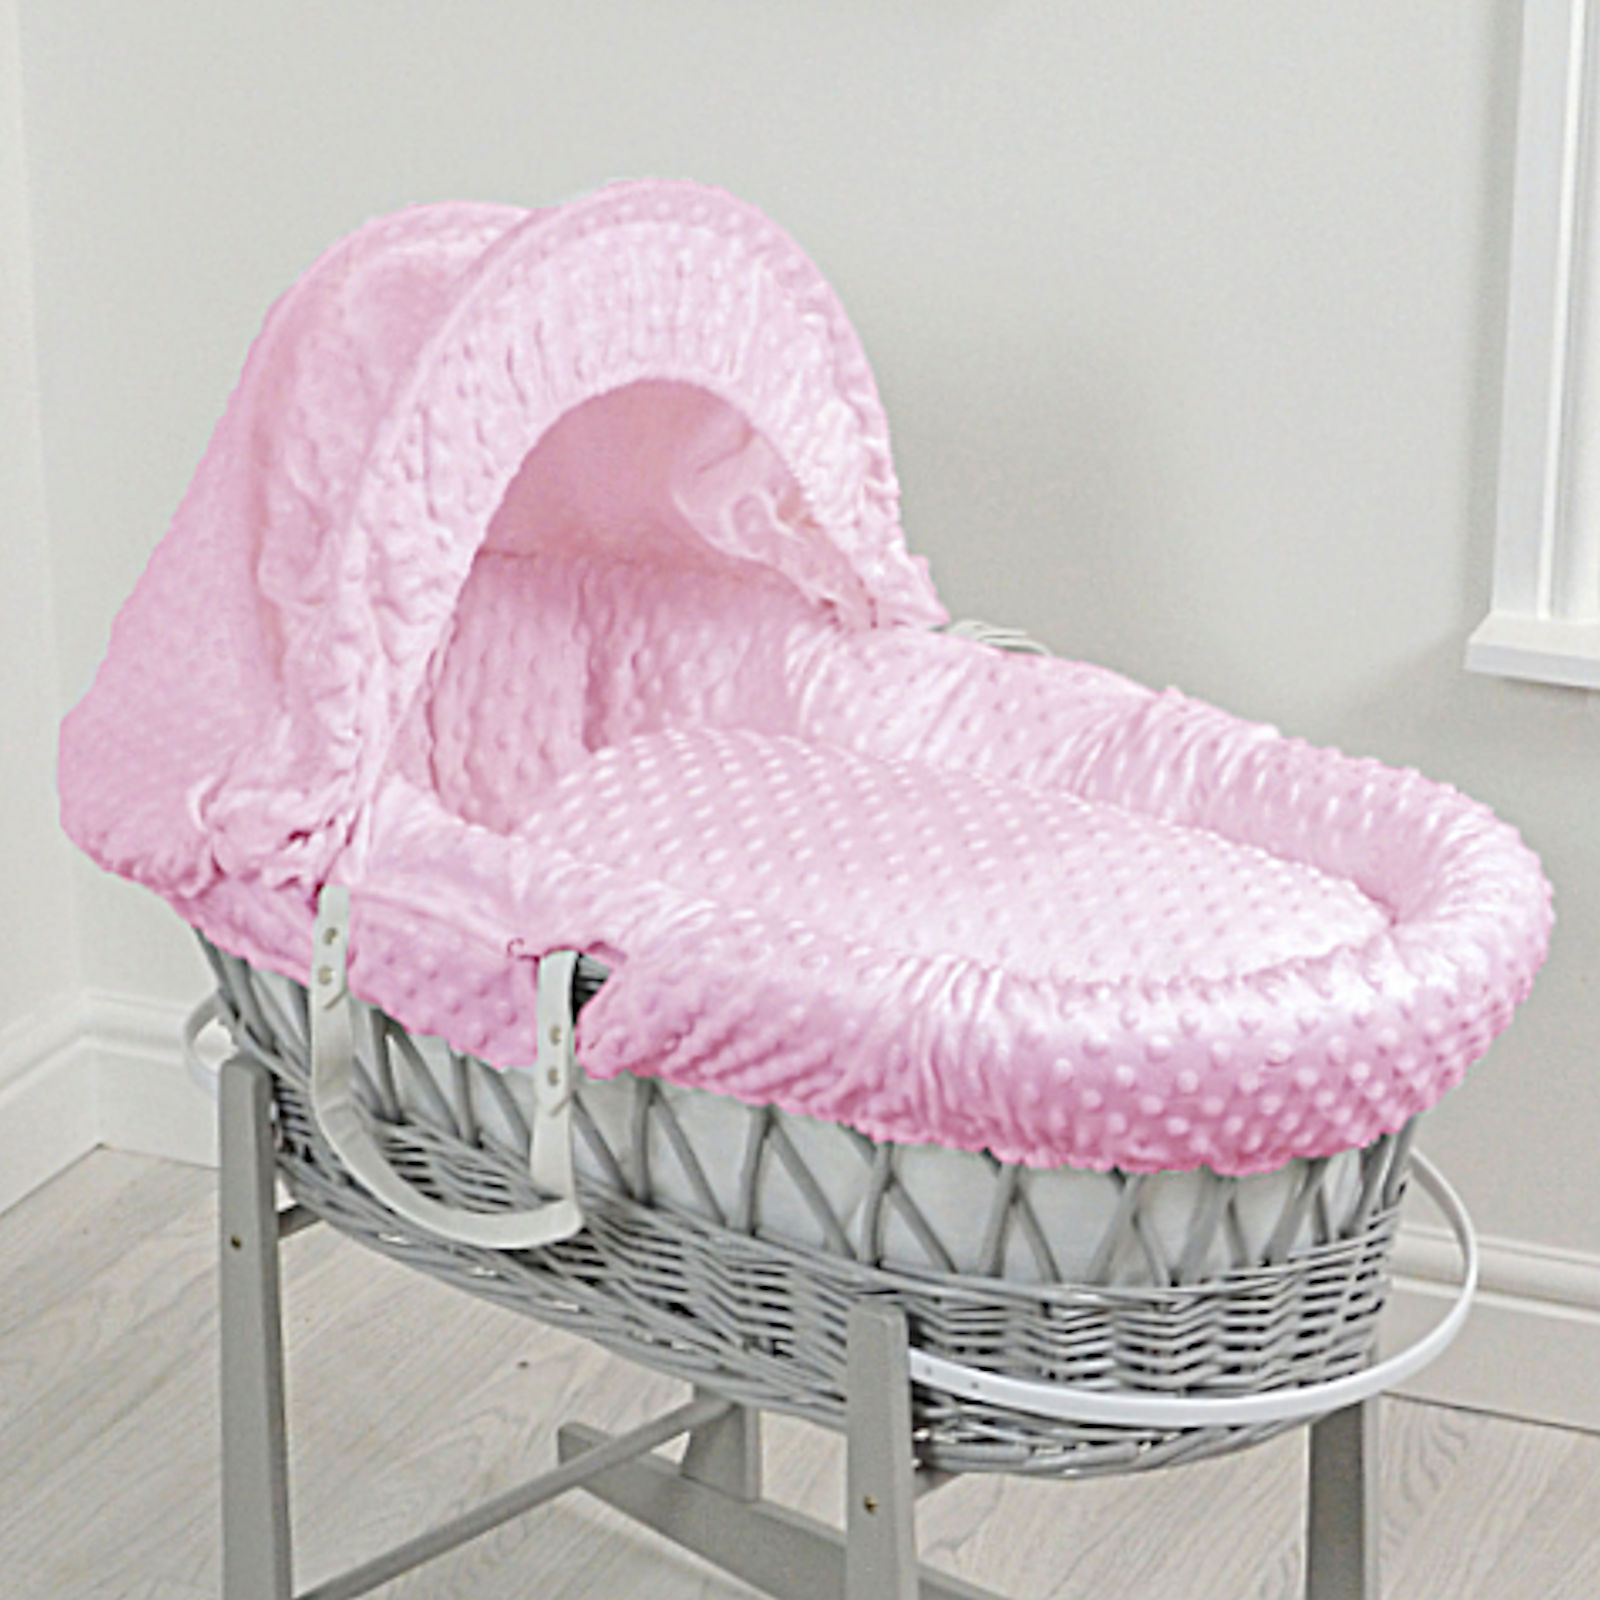 4baby Deluxe Padded Grey Wicker Moses Basket - Pink Dimple